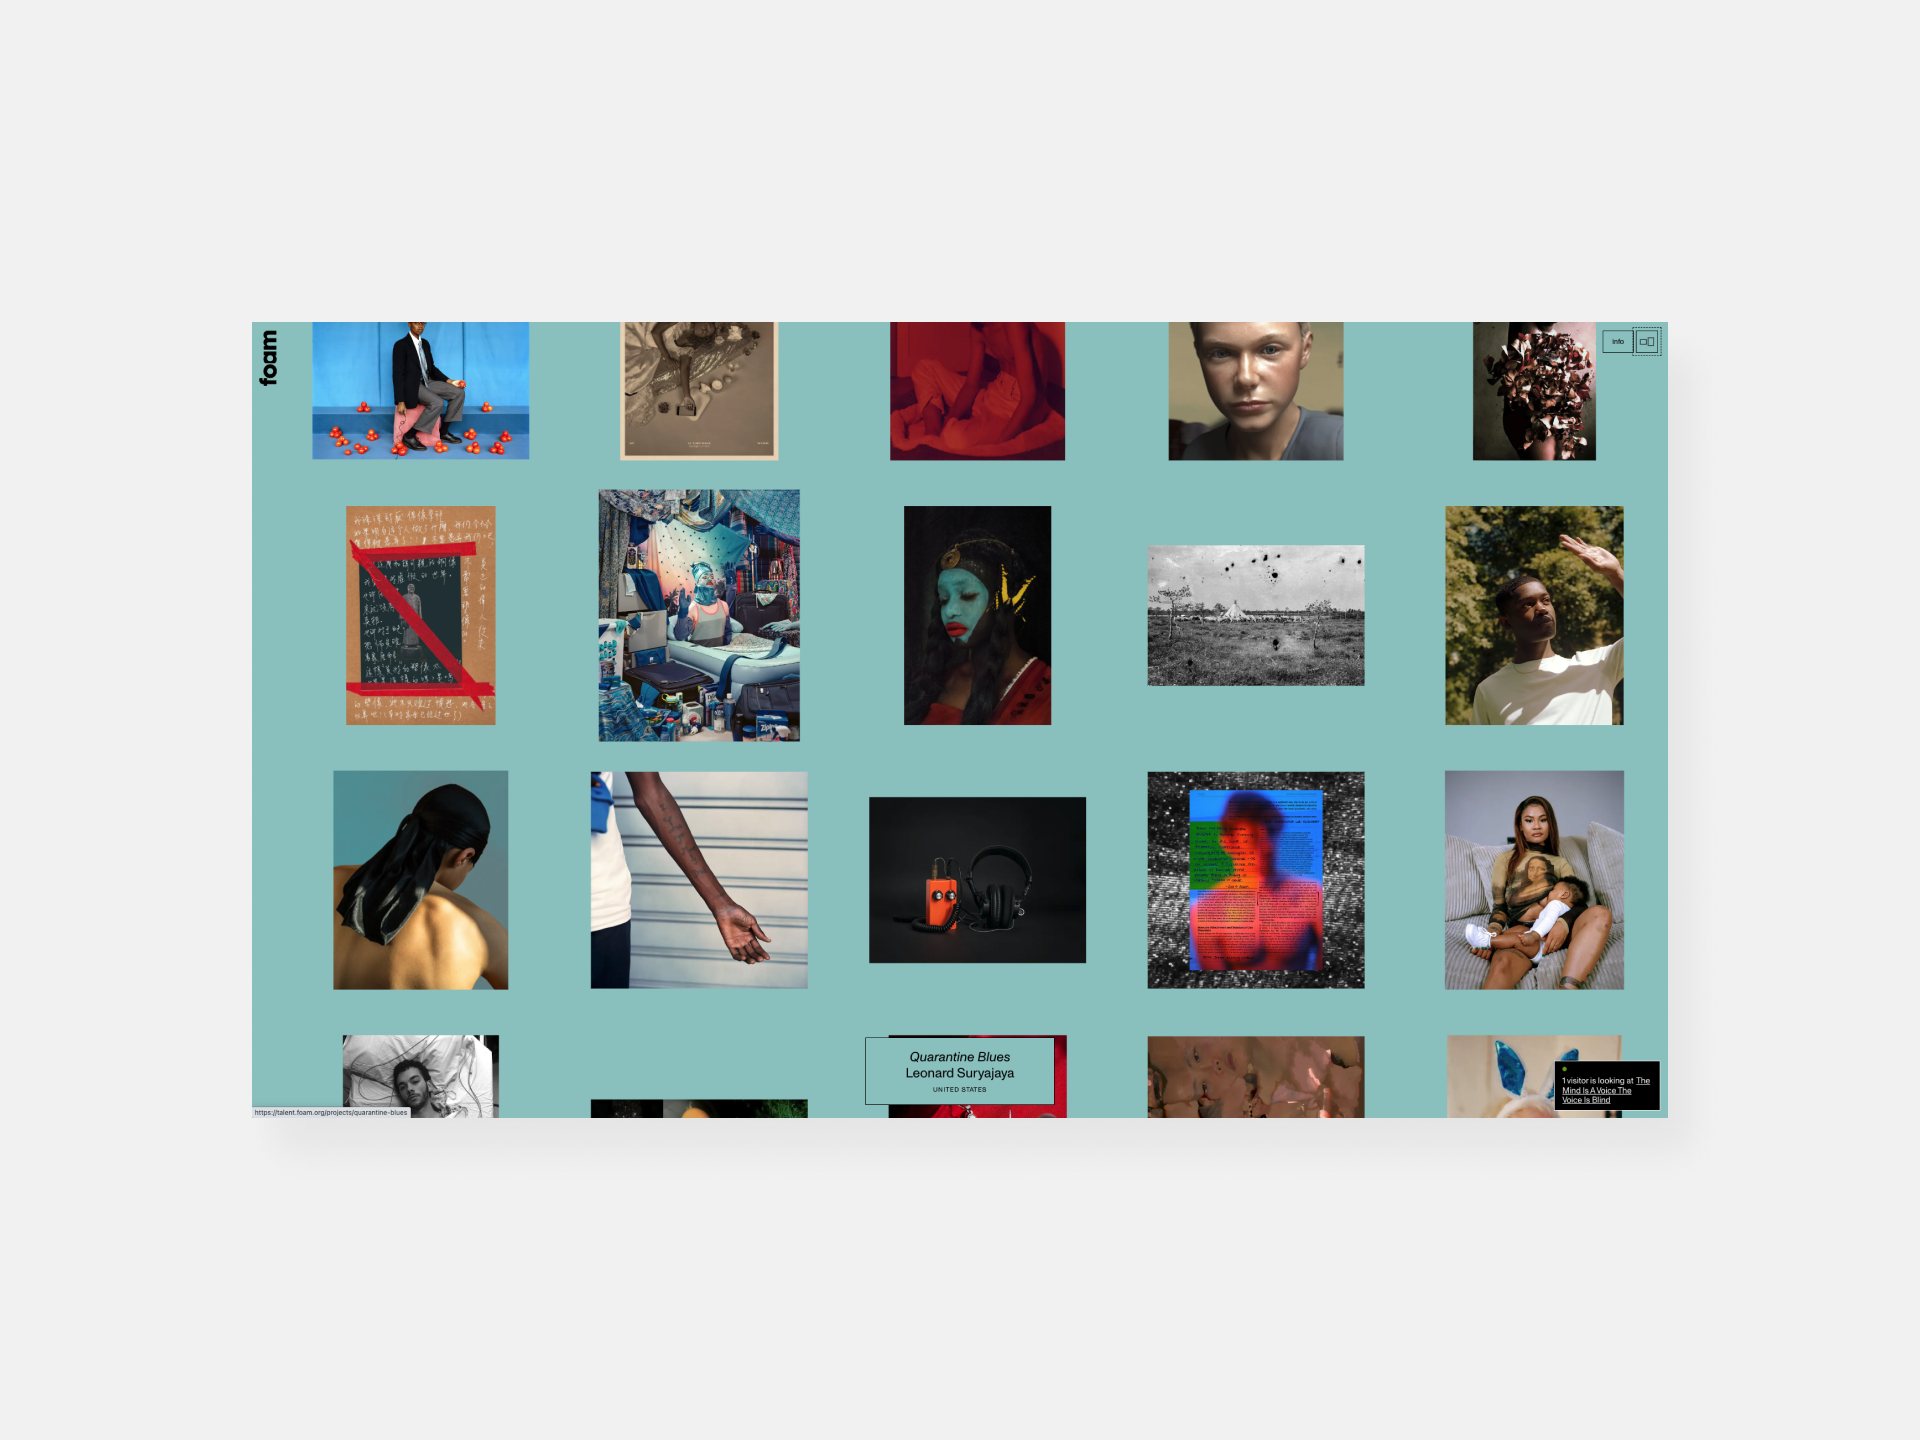 Slide that shows the homepage of Foam Talent 2021 showcasing the 20 featured artists of the exhibition.